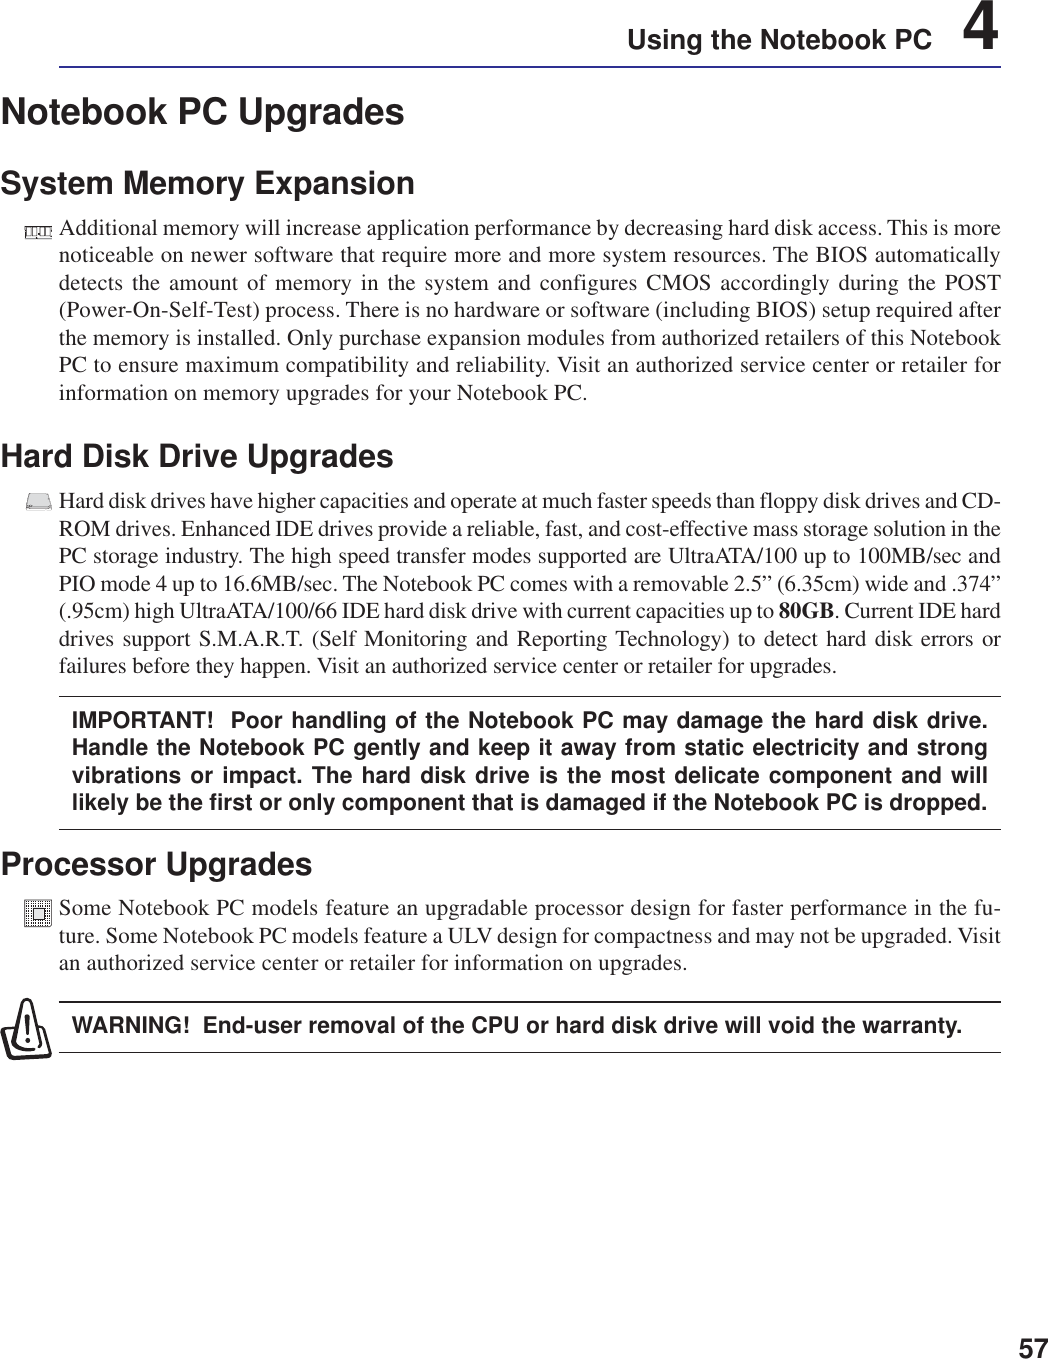 57Using the Notebook PC    4Notebook PC UpgradesSystem Memory ExpansionAdditional memory will increase application performance by decreasing hard disk access. This is morenoticeable on newer software that require more and more system resources. The BIOS automaticallydetects the amount of memory in the system and configures CMOS accordingly during the POST(Power-On-Self-Test) process. There is no hardware or software (including BIOS) setup required afterthe memory is installed. Only purchase expansion modules from authorized retailers of this NotebookPC to ensure maximum compatibility and reliability. Visit an authorized service center or retailer forinformation on memory upgrades for your Notebook PC.Hard Disk Drive UpgradesHard disk drives have higher capacities and operate at much faster speeds than floppy disk drives and CD-ROM drives. Enhanced IDE drives provide a reliable, fast, and cost-effective mass storage solution in thePC storage industry. The high speed transfer modes supported are UltraATA/100 up to 100MB/sec andPIO mode 4 up to 16.6MB/sec. The Notebook PC comes with a removable 2.5” (6.35cm) wide and .374”(.95cm) high UltraATA/100/66 IDE hard disk drive with current capacities up to 80GB. Current IDE harddrives support S.M.A.R.T. (Self Monitoring and Reporting Technology) to detect hard disk errors orfailures before they happen. Visit an authorized service center or retailer for upgrades.IMPORTANT!  Poor handling of the Notebook PC may damage the hard disk drive.Handle the Notebook PC gently and keep it away from static electricity and strongvibrations or impact. The hard disk drive is the most delicate component and willlikely be the first or only component that is damaged if the Notebook PC is dropped.Processor UpgradesSome Notebook PC models feature an upgradable processor design for faster performance in the fu-ture. Some Notebook PC models feature a ULV design for compactness and may not be upgraded. Visitan authorized service center or retailer for information on upgrades.WARNING!  End-user removal of the CPU or hard disk drive will void the warranty.